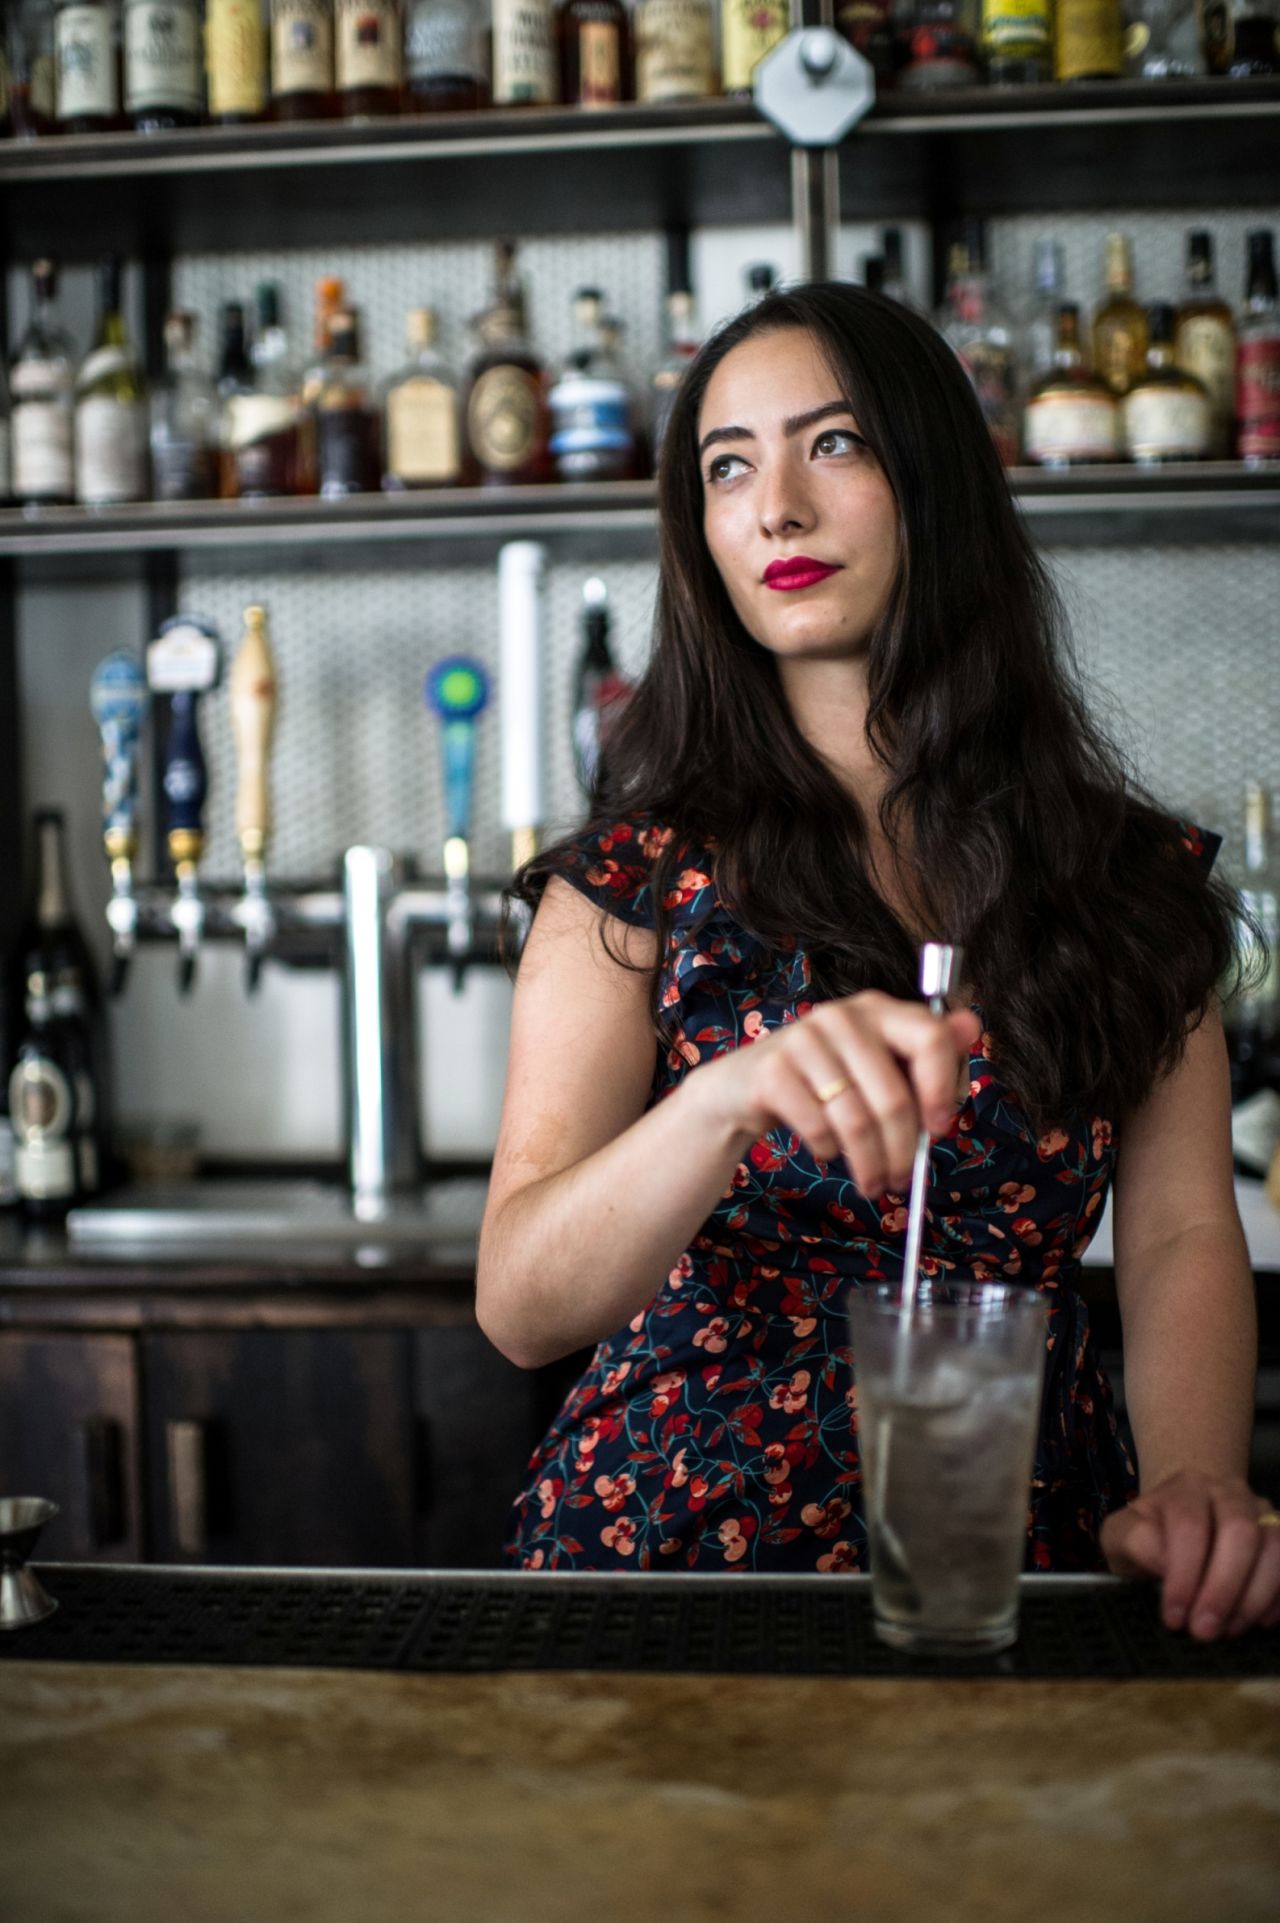 "I don't think mixologist is a bad term, but it's more important to be welcoming and fun with guests than being technically perfect," says Natasha David, founder of New York cocktail bar Nitecap.